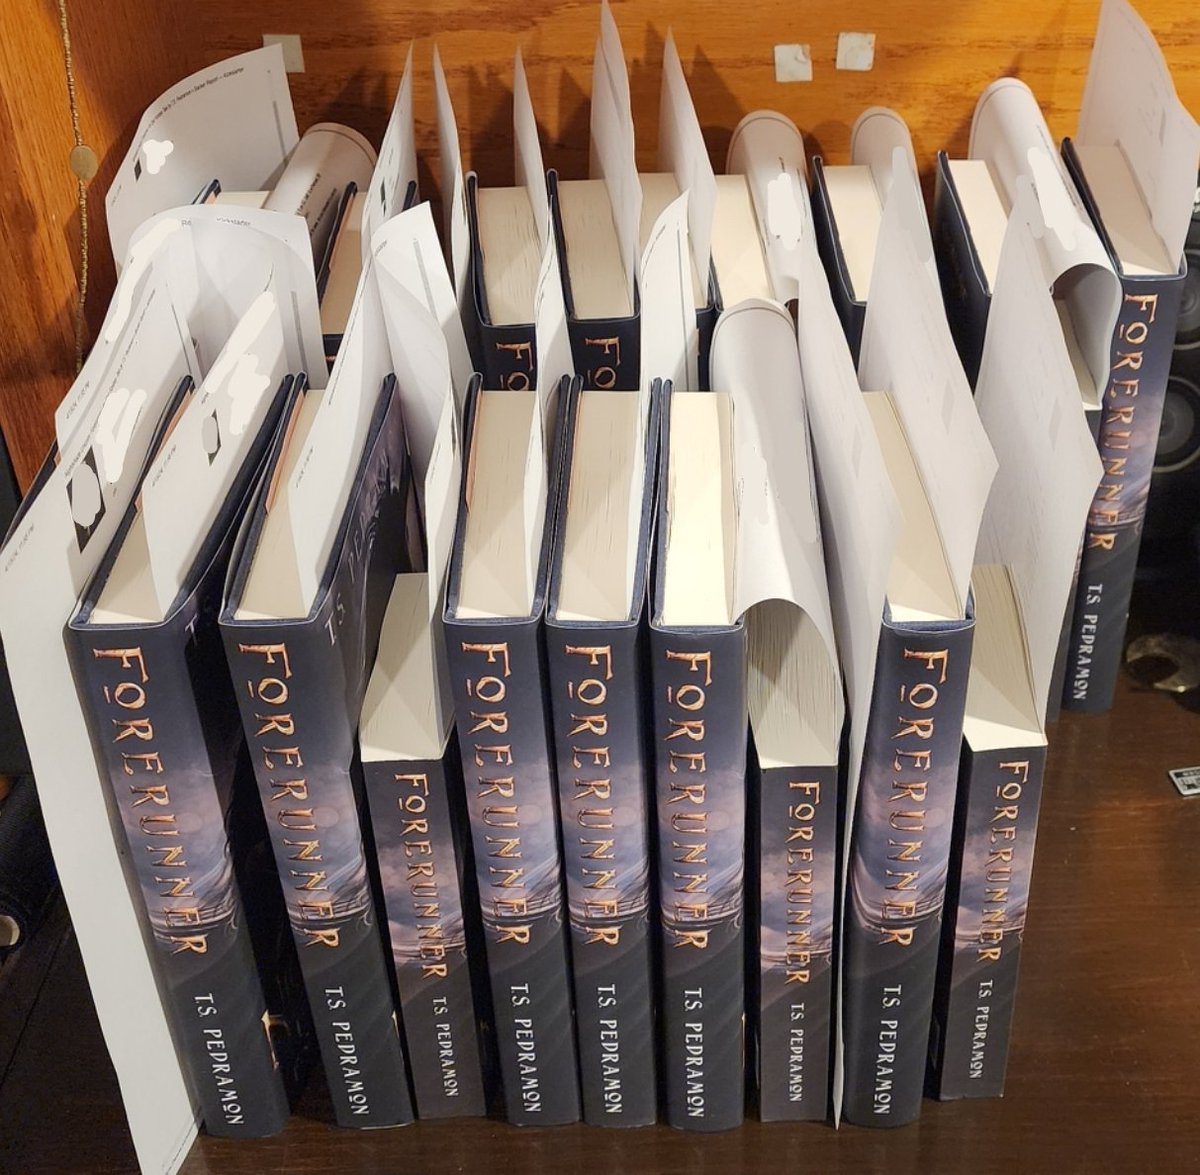 Prepping Kickstarter orders! 
I still need to sign these and some of them need extras included. I need to get them organized to make sure I don't mix any of them up. 

#Kickstarter #fulfillment #epic #fantasy #signedbooks #bookstagram #forerunner #dustjacket #author